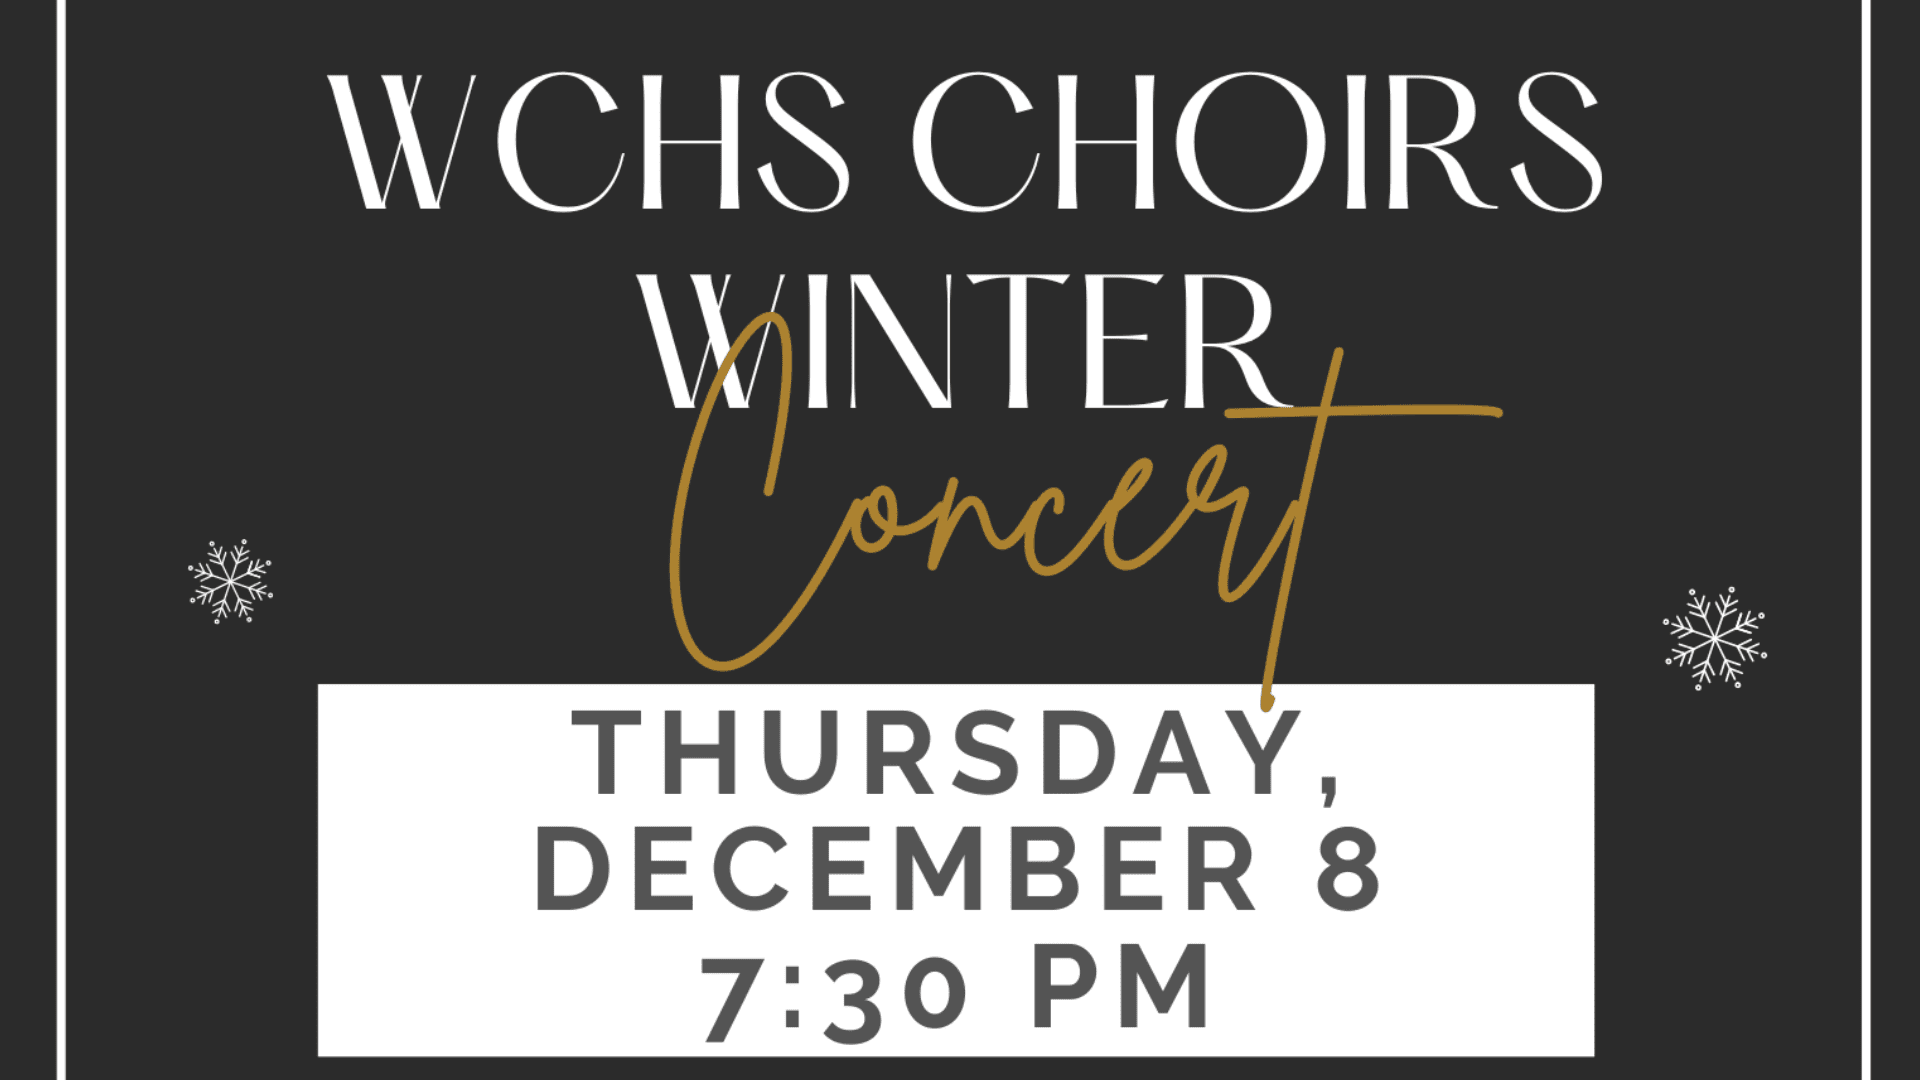 A flyer about the information about the WCHS choirs winter